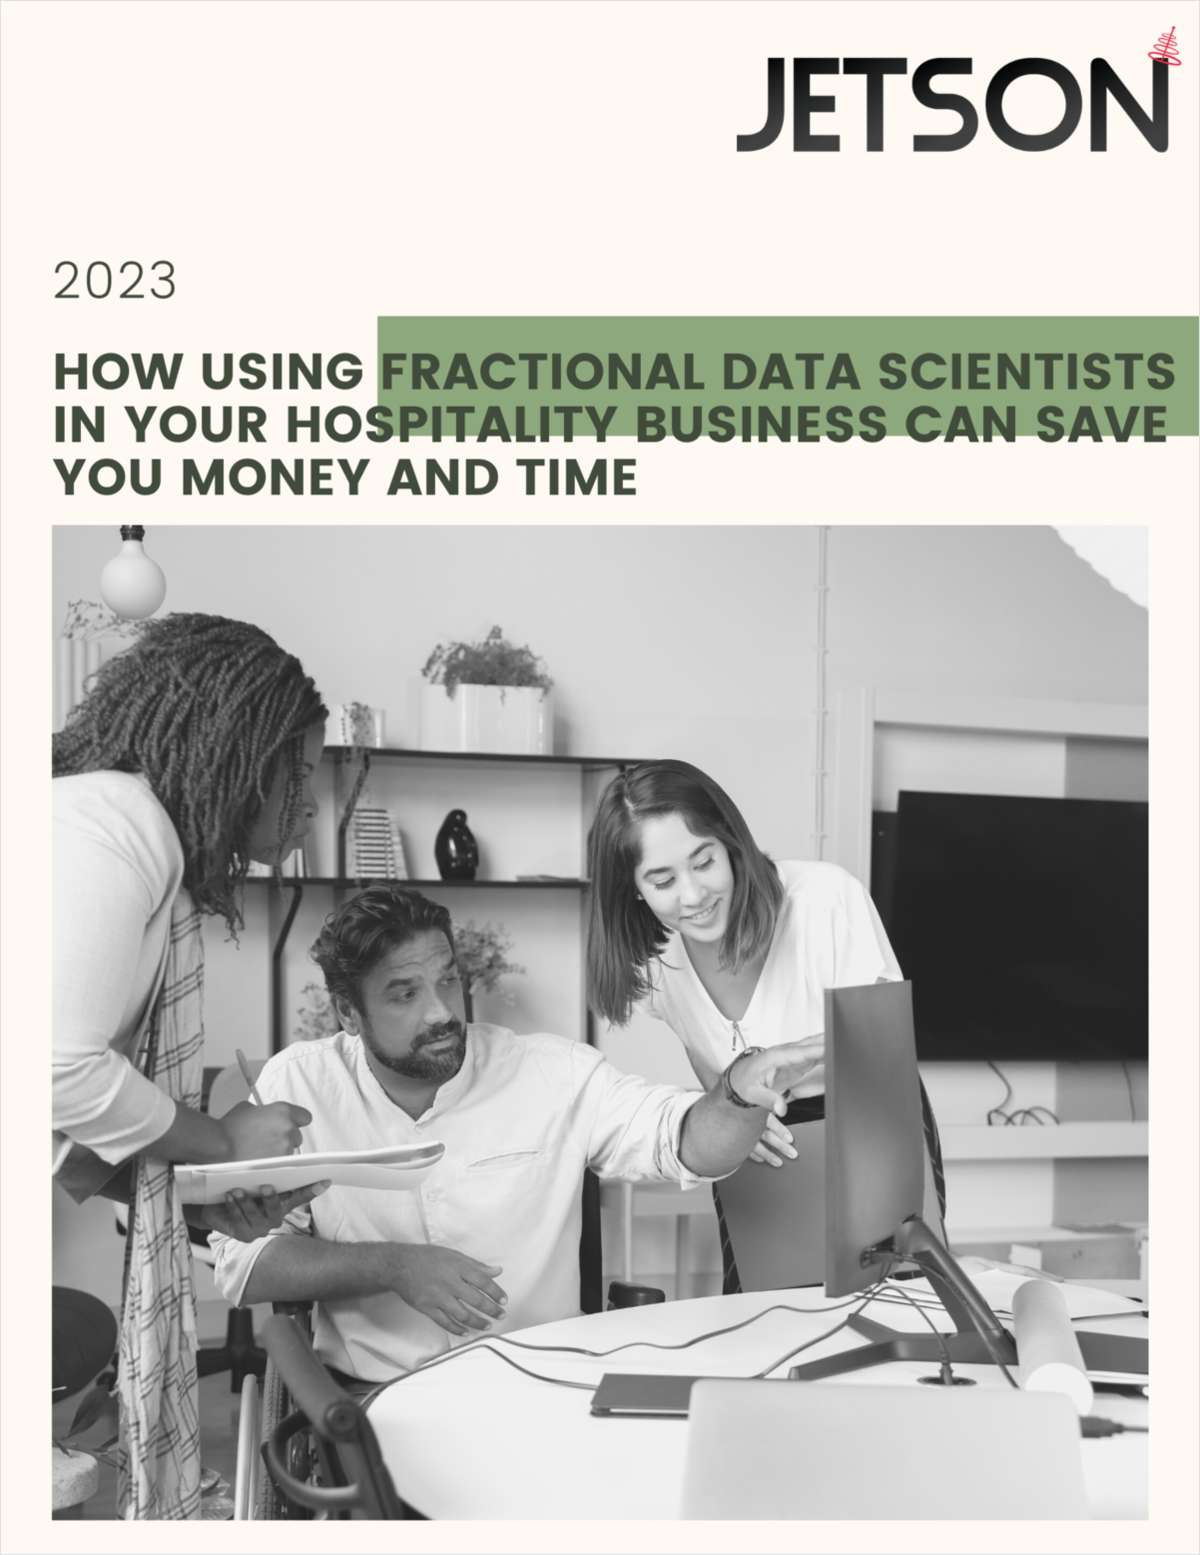 How Using Fractional Data Scientists In Your Hospitality Business Can Save You Money and Time